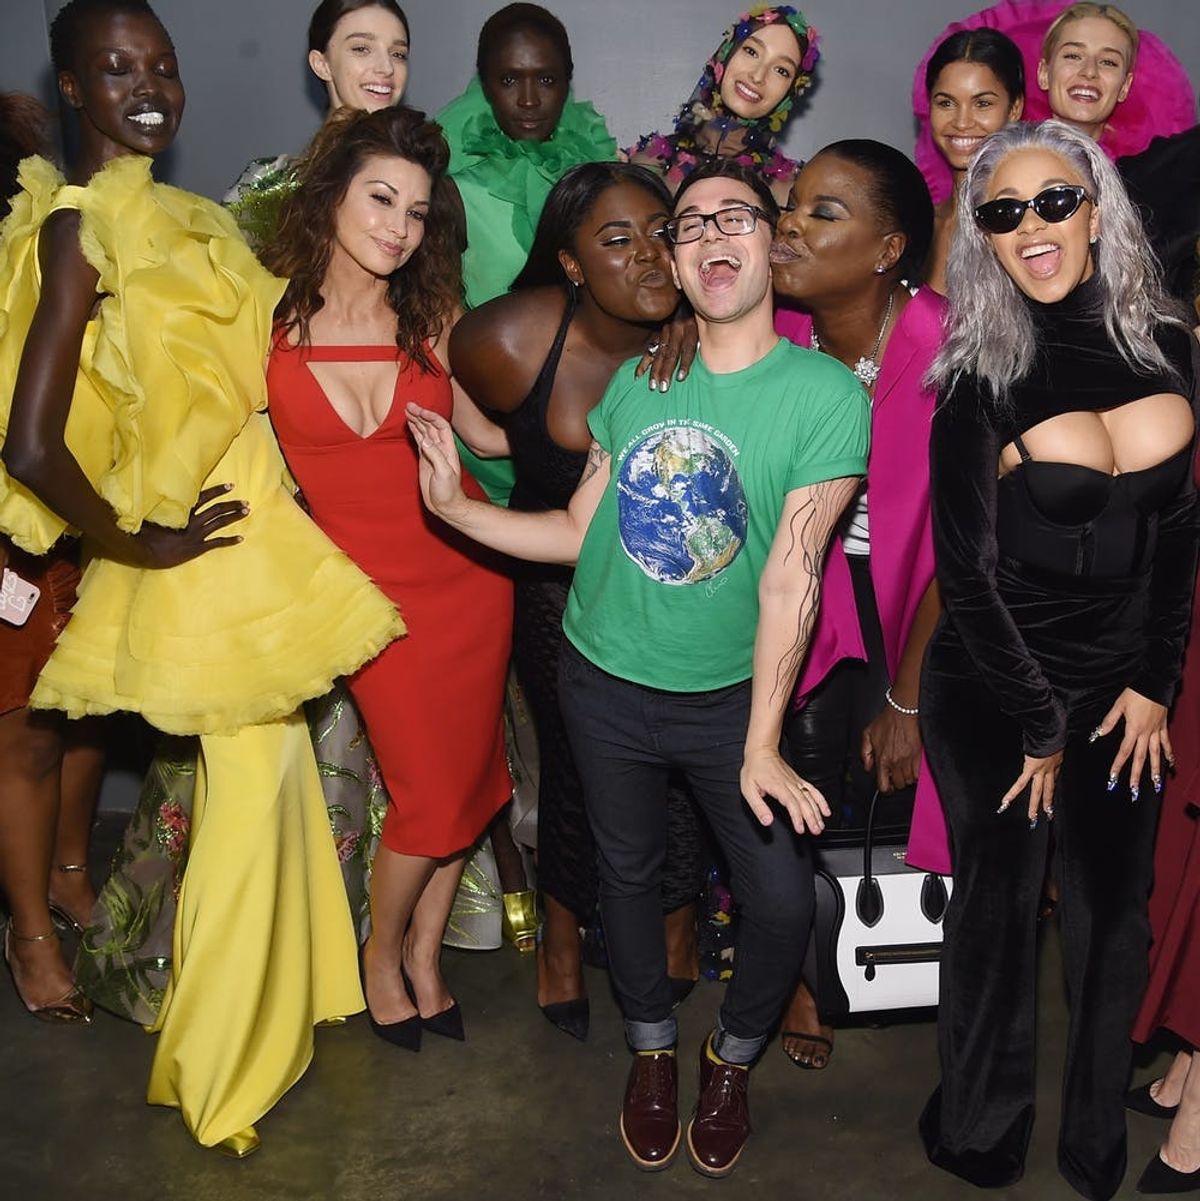 Designer Christian Siriano Just Followed His Diverse NYFW Showing With an Unapologetic Plea for Inclusivity in Fashion